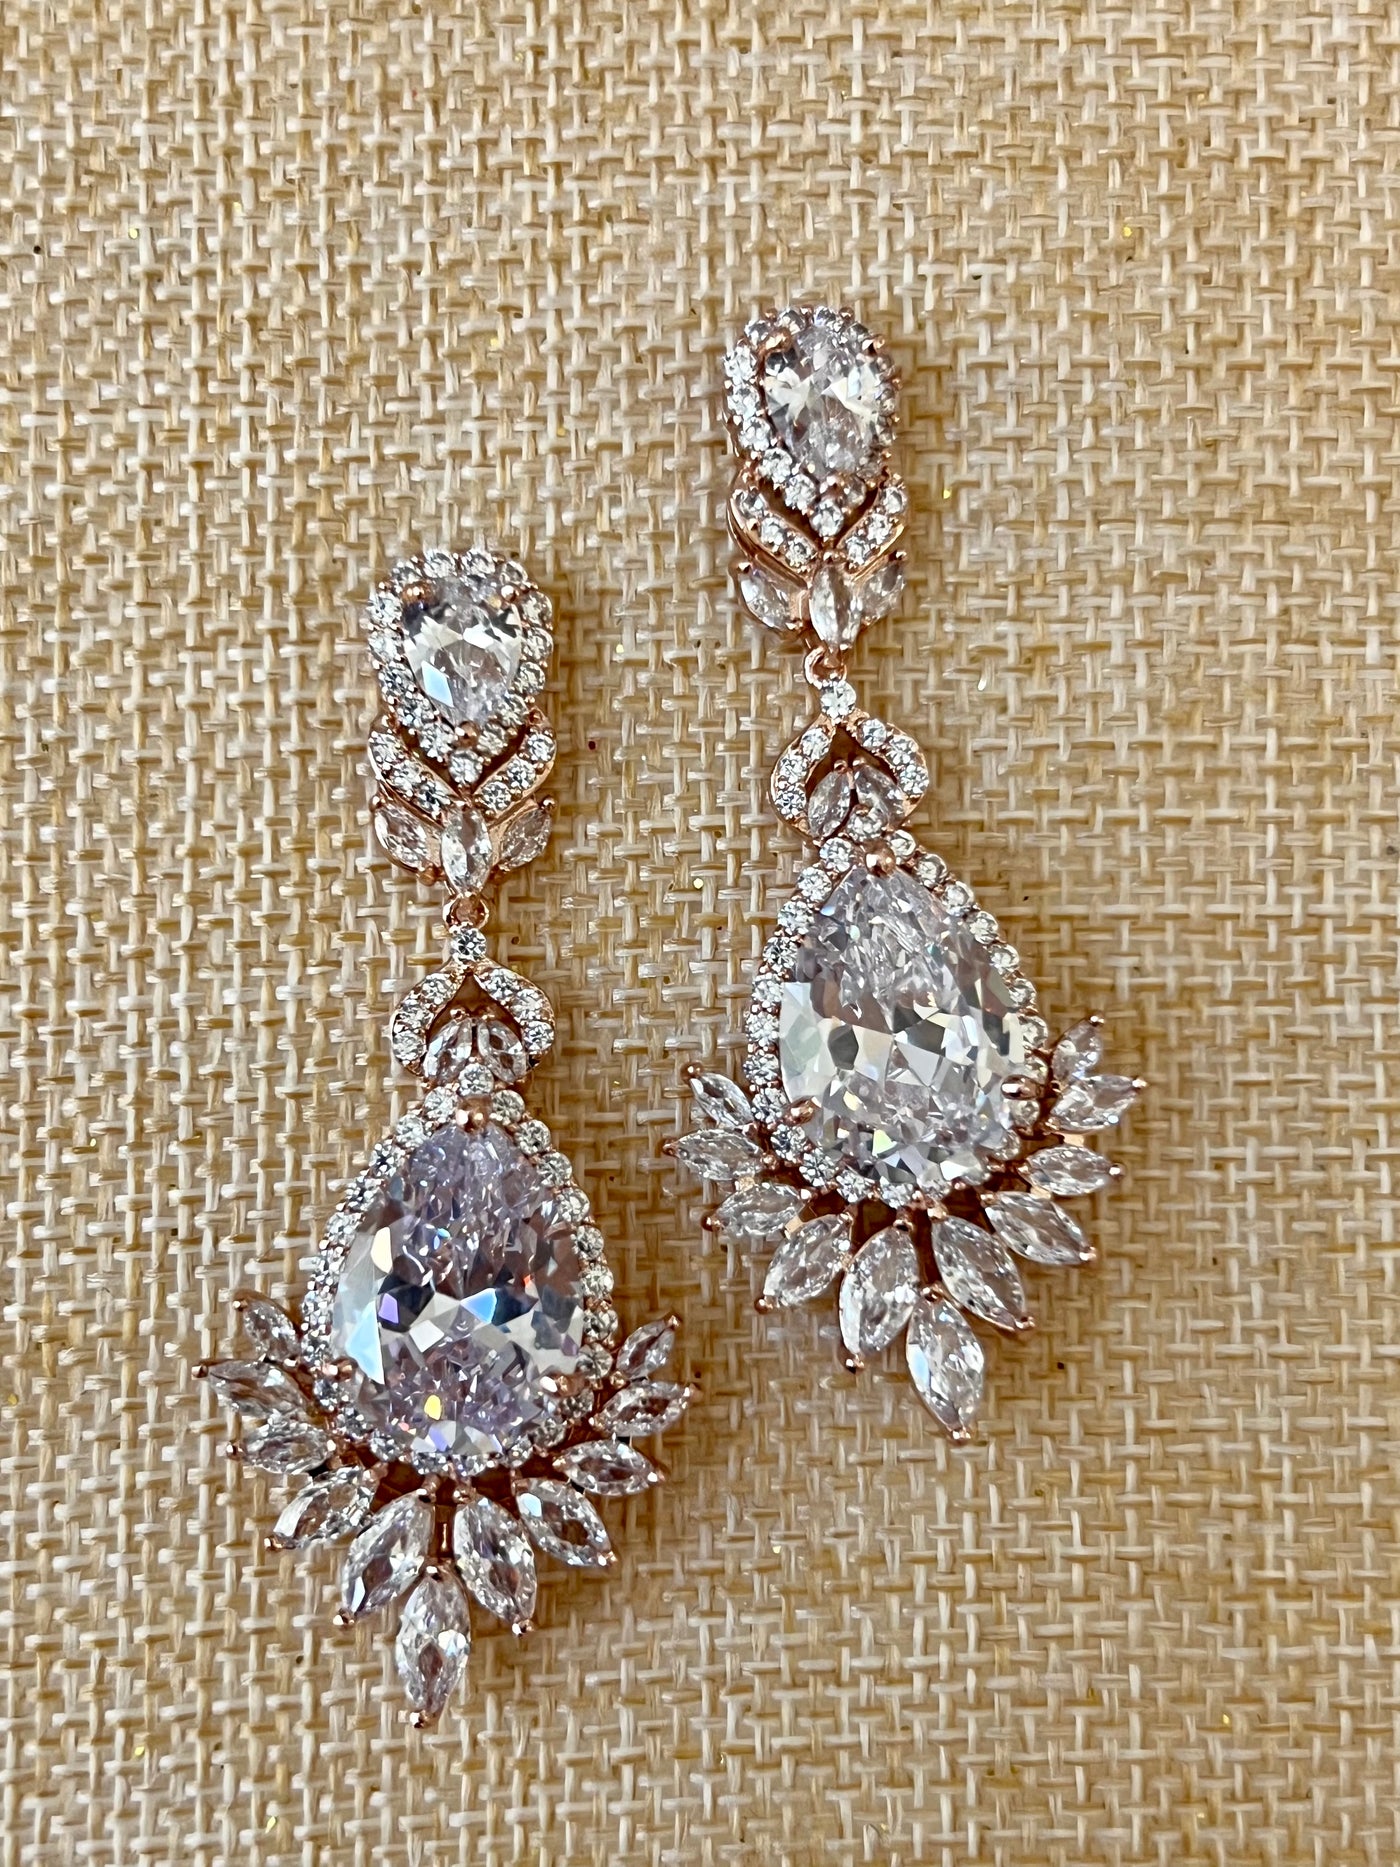 Rose Gold Bridal Earrings, Swarovski and Zirconia Wedding jewelry, Luxury Drop Earring from Lucky Collections